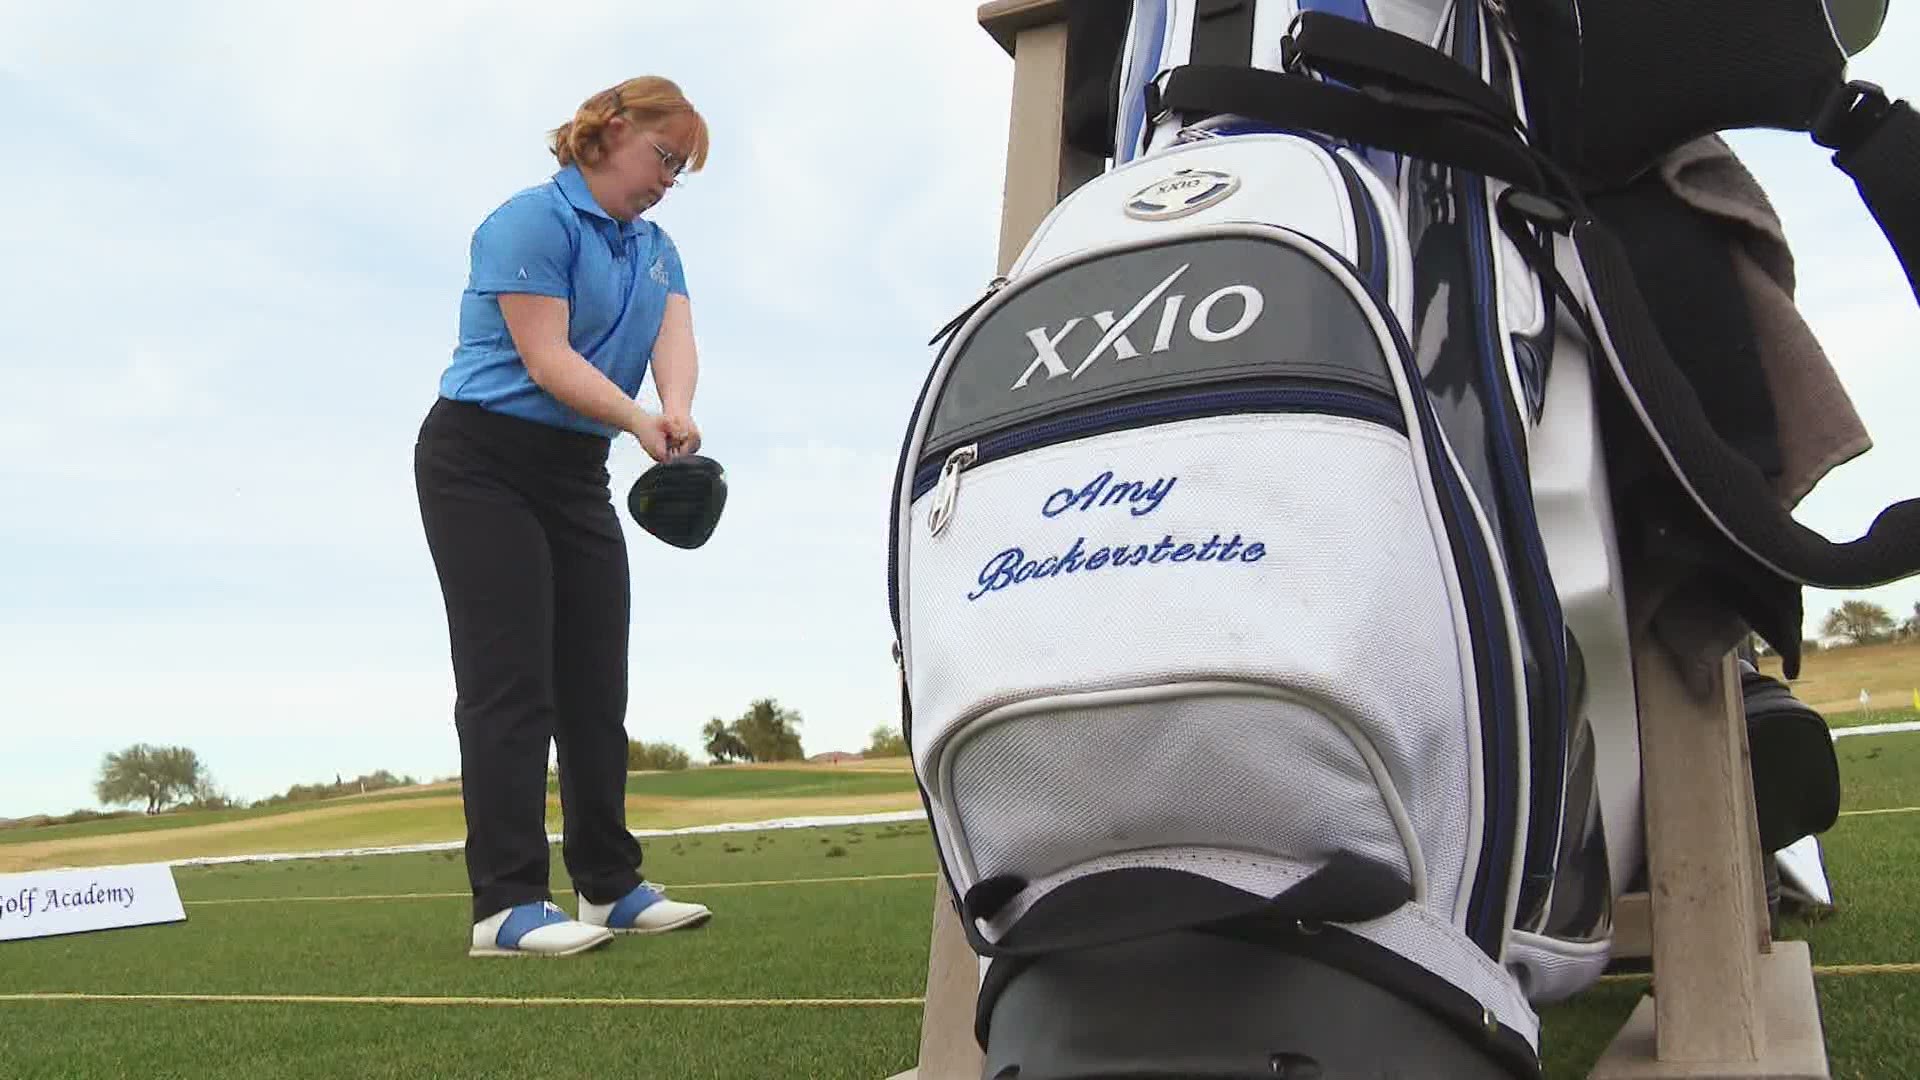 Amy's "I Got This Foundation" launched their first golf academy for adults with intellectual disabilities.